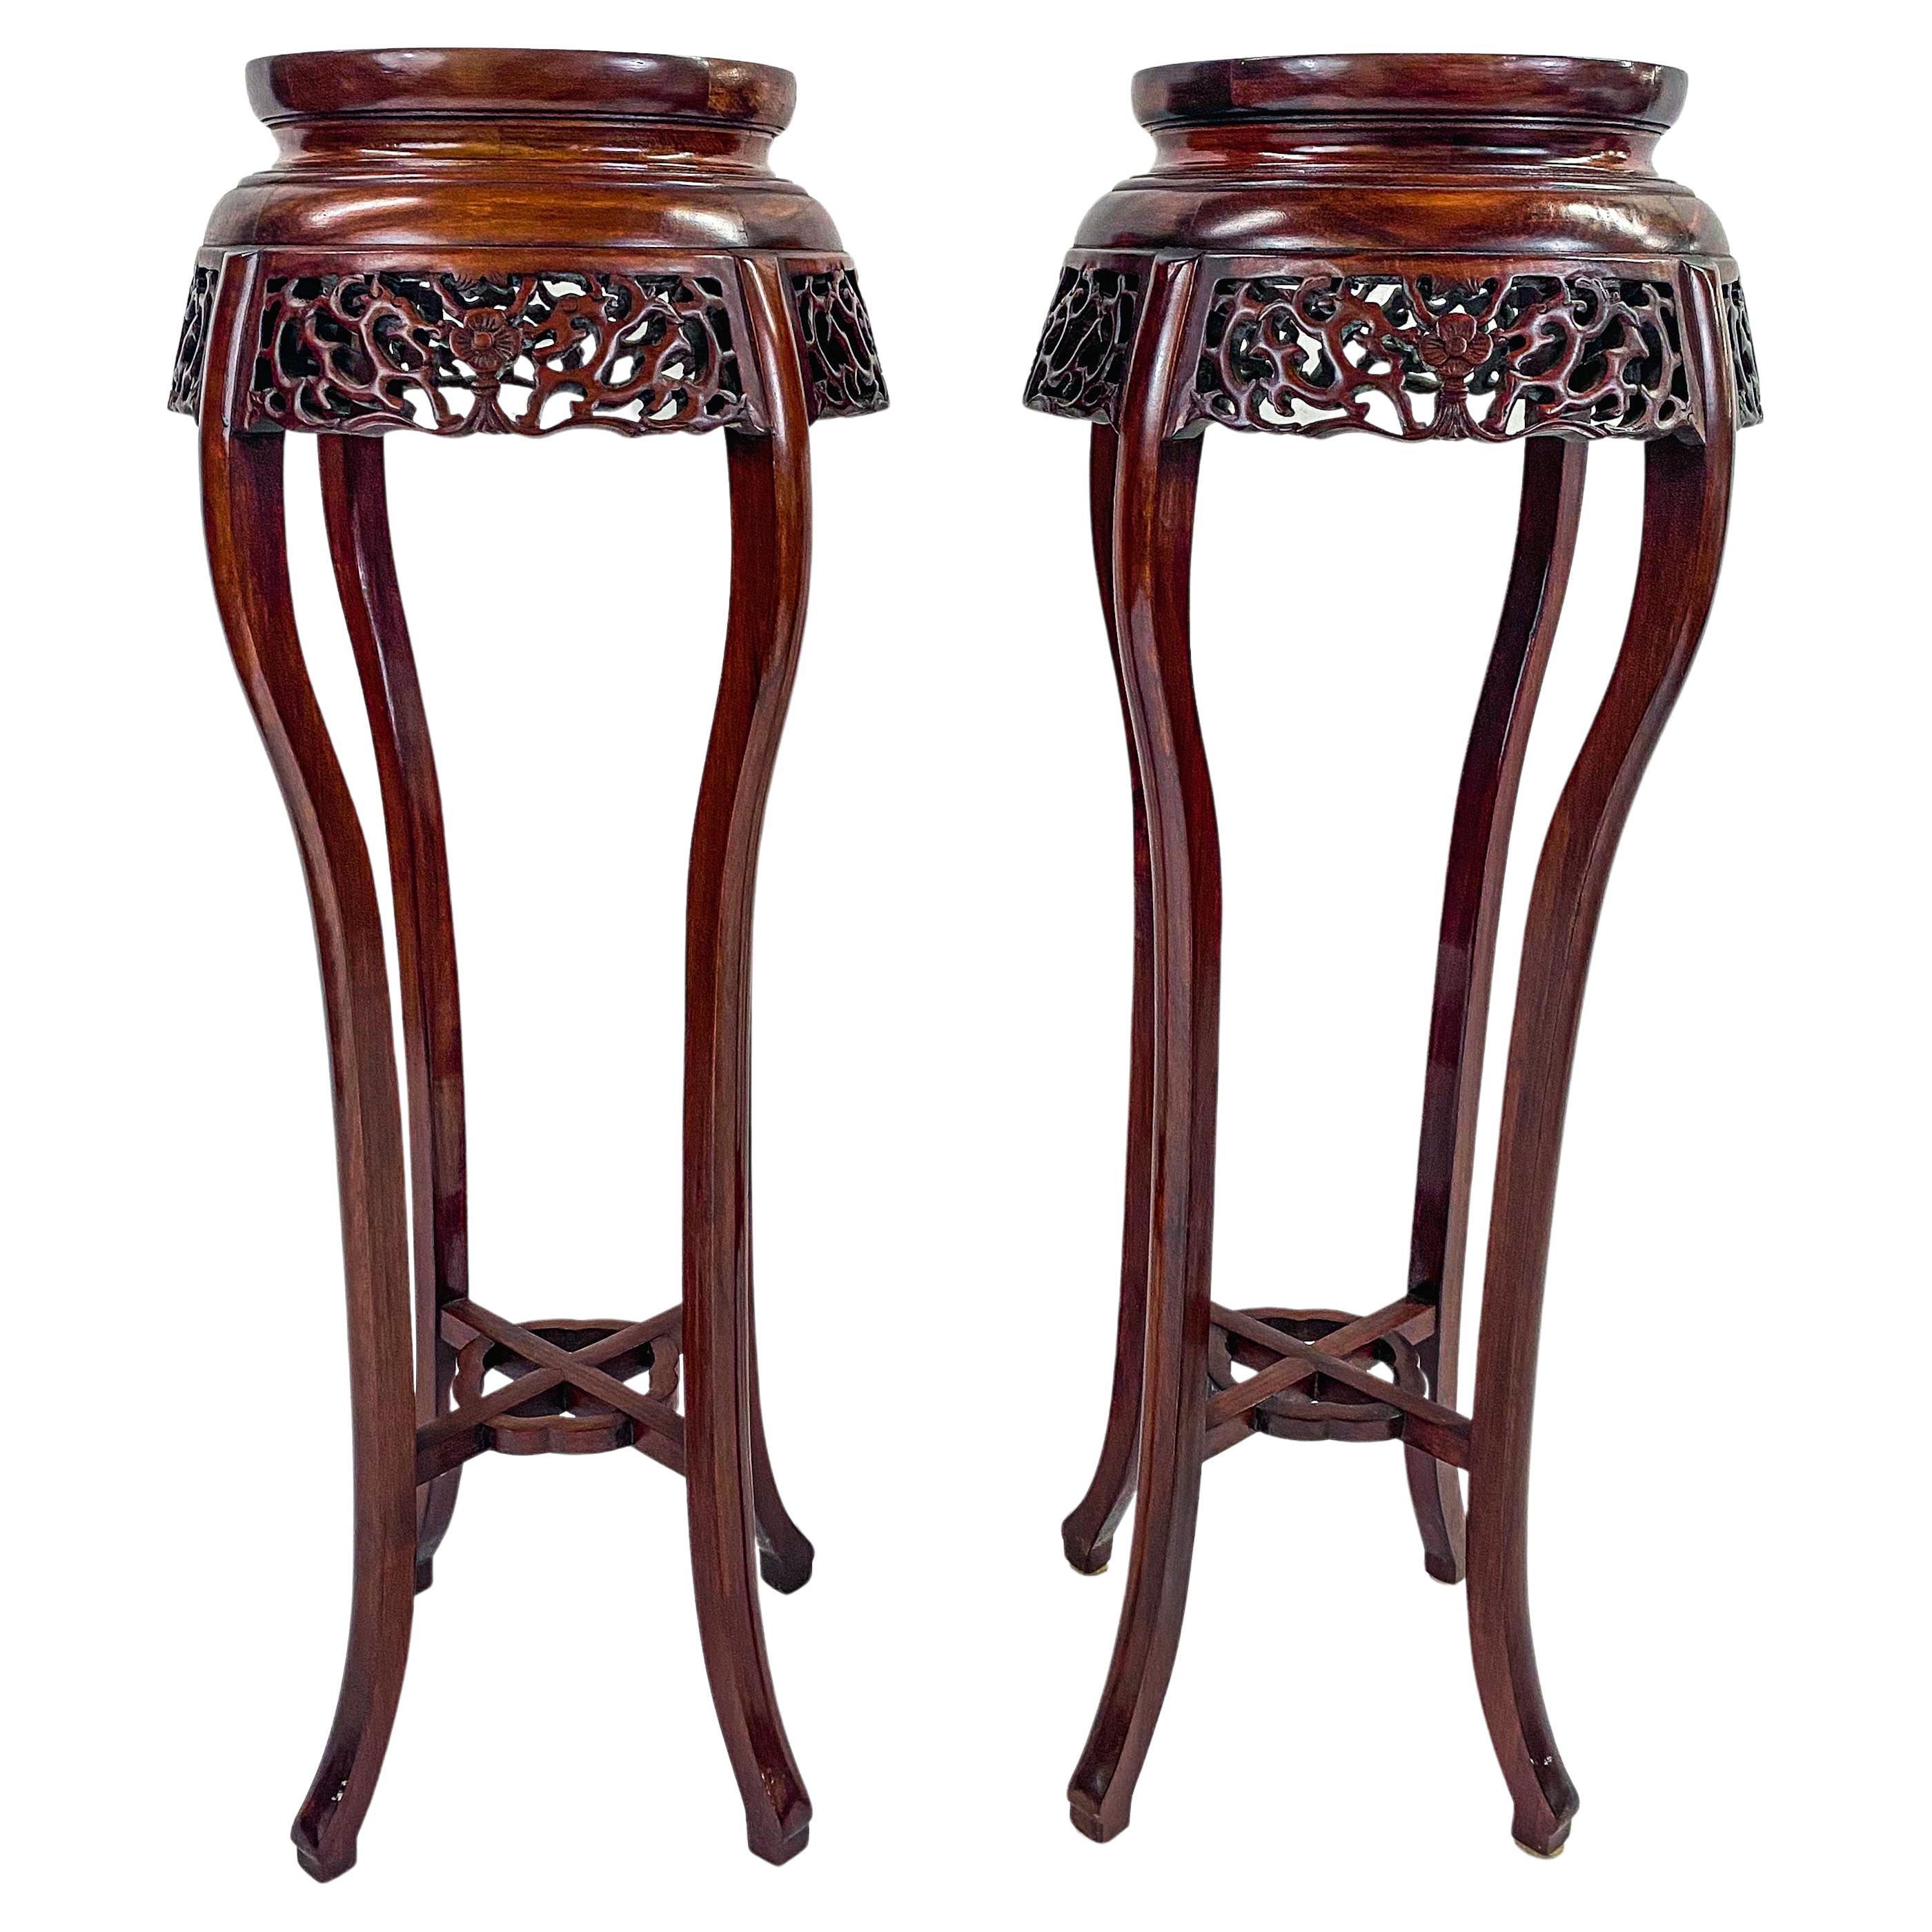 A classy pair of hand-carved Rosewood Chinese Oriental plant stands or pedestals. The aprons are embellished with floral design carving and the legs are beautifully curved with the circular top featuring green malachite adding style to this rare